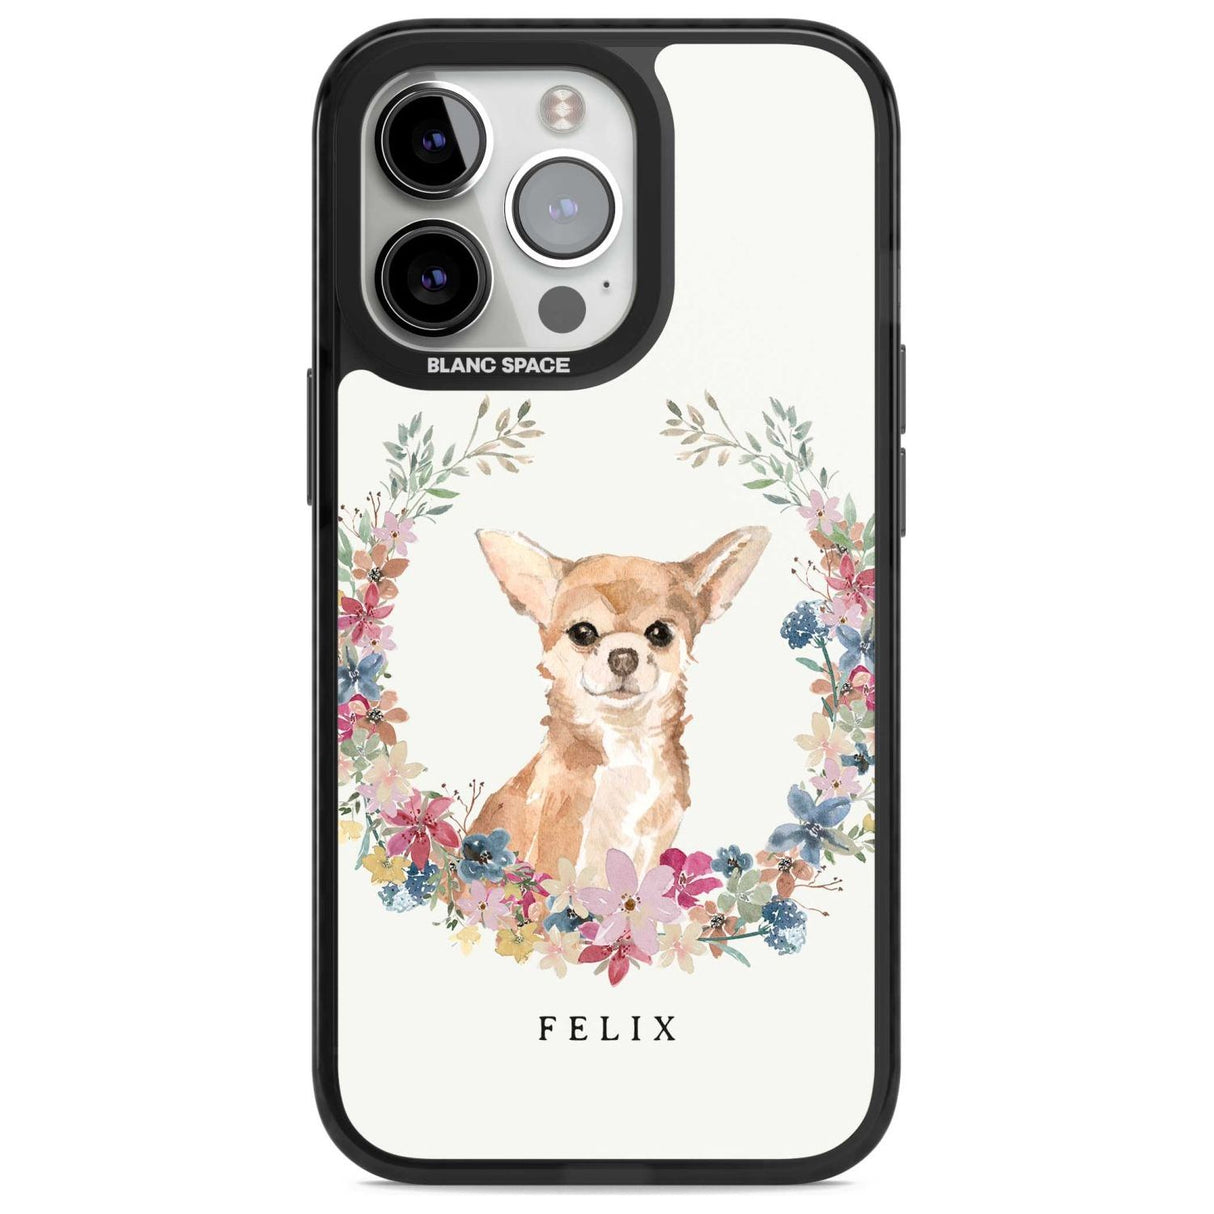 Personalised Chihuahua - Watercolour Dog Portrait Custom Phone Case iPhone 15 Pro Max / Magsafe Black Impact Case,iPhone 15 Pro / Magsafe Black Impact Case,iPhone 14 Pro Max / Magsafe Black Impact Case,iPhone 14 Pro / Magsafe Black Impact Case,iPhone 13 Pro / Magsafe Black Impact Case Blanc Space